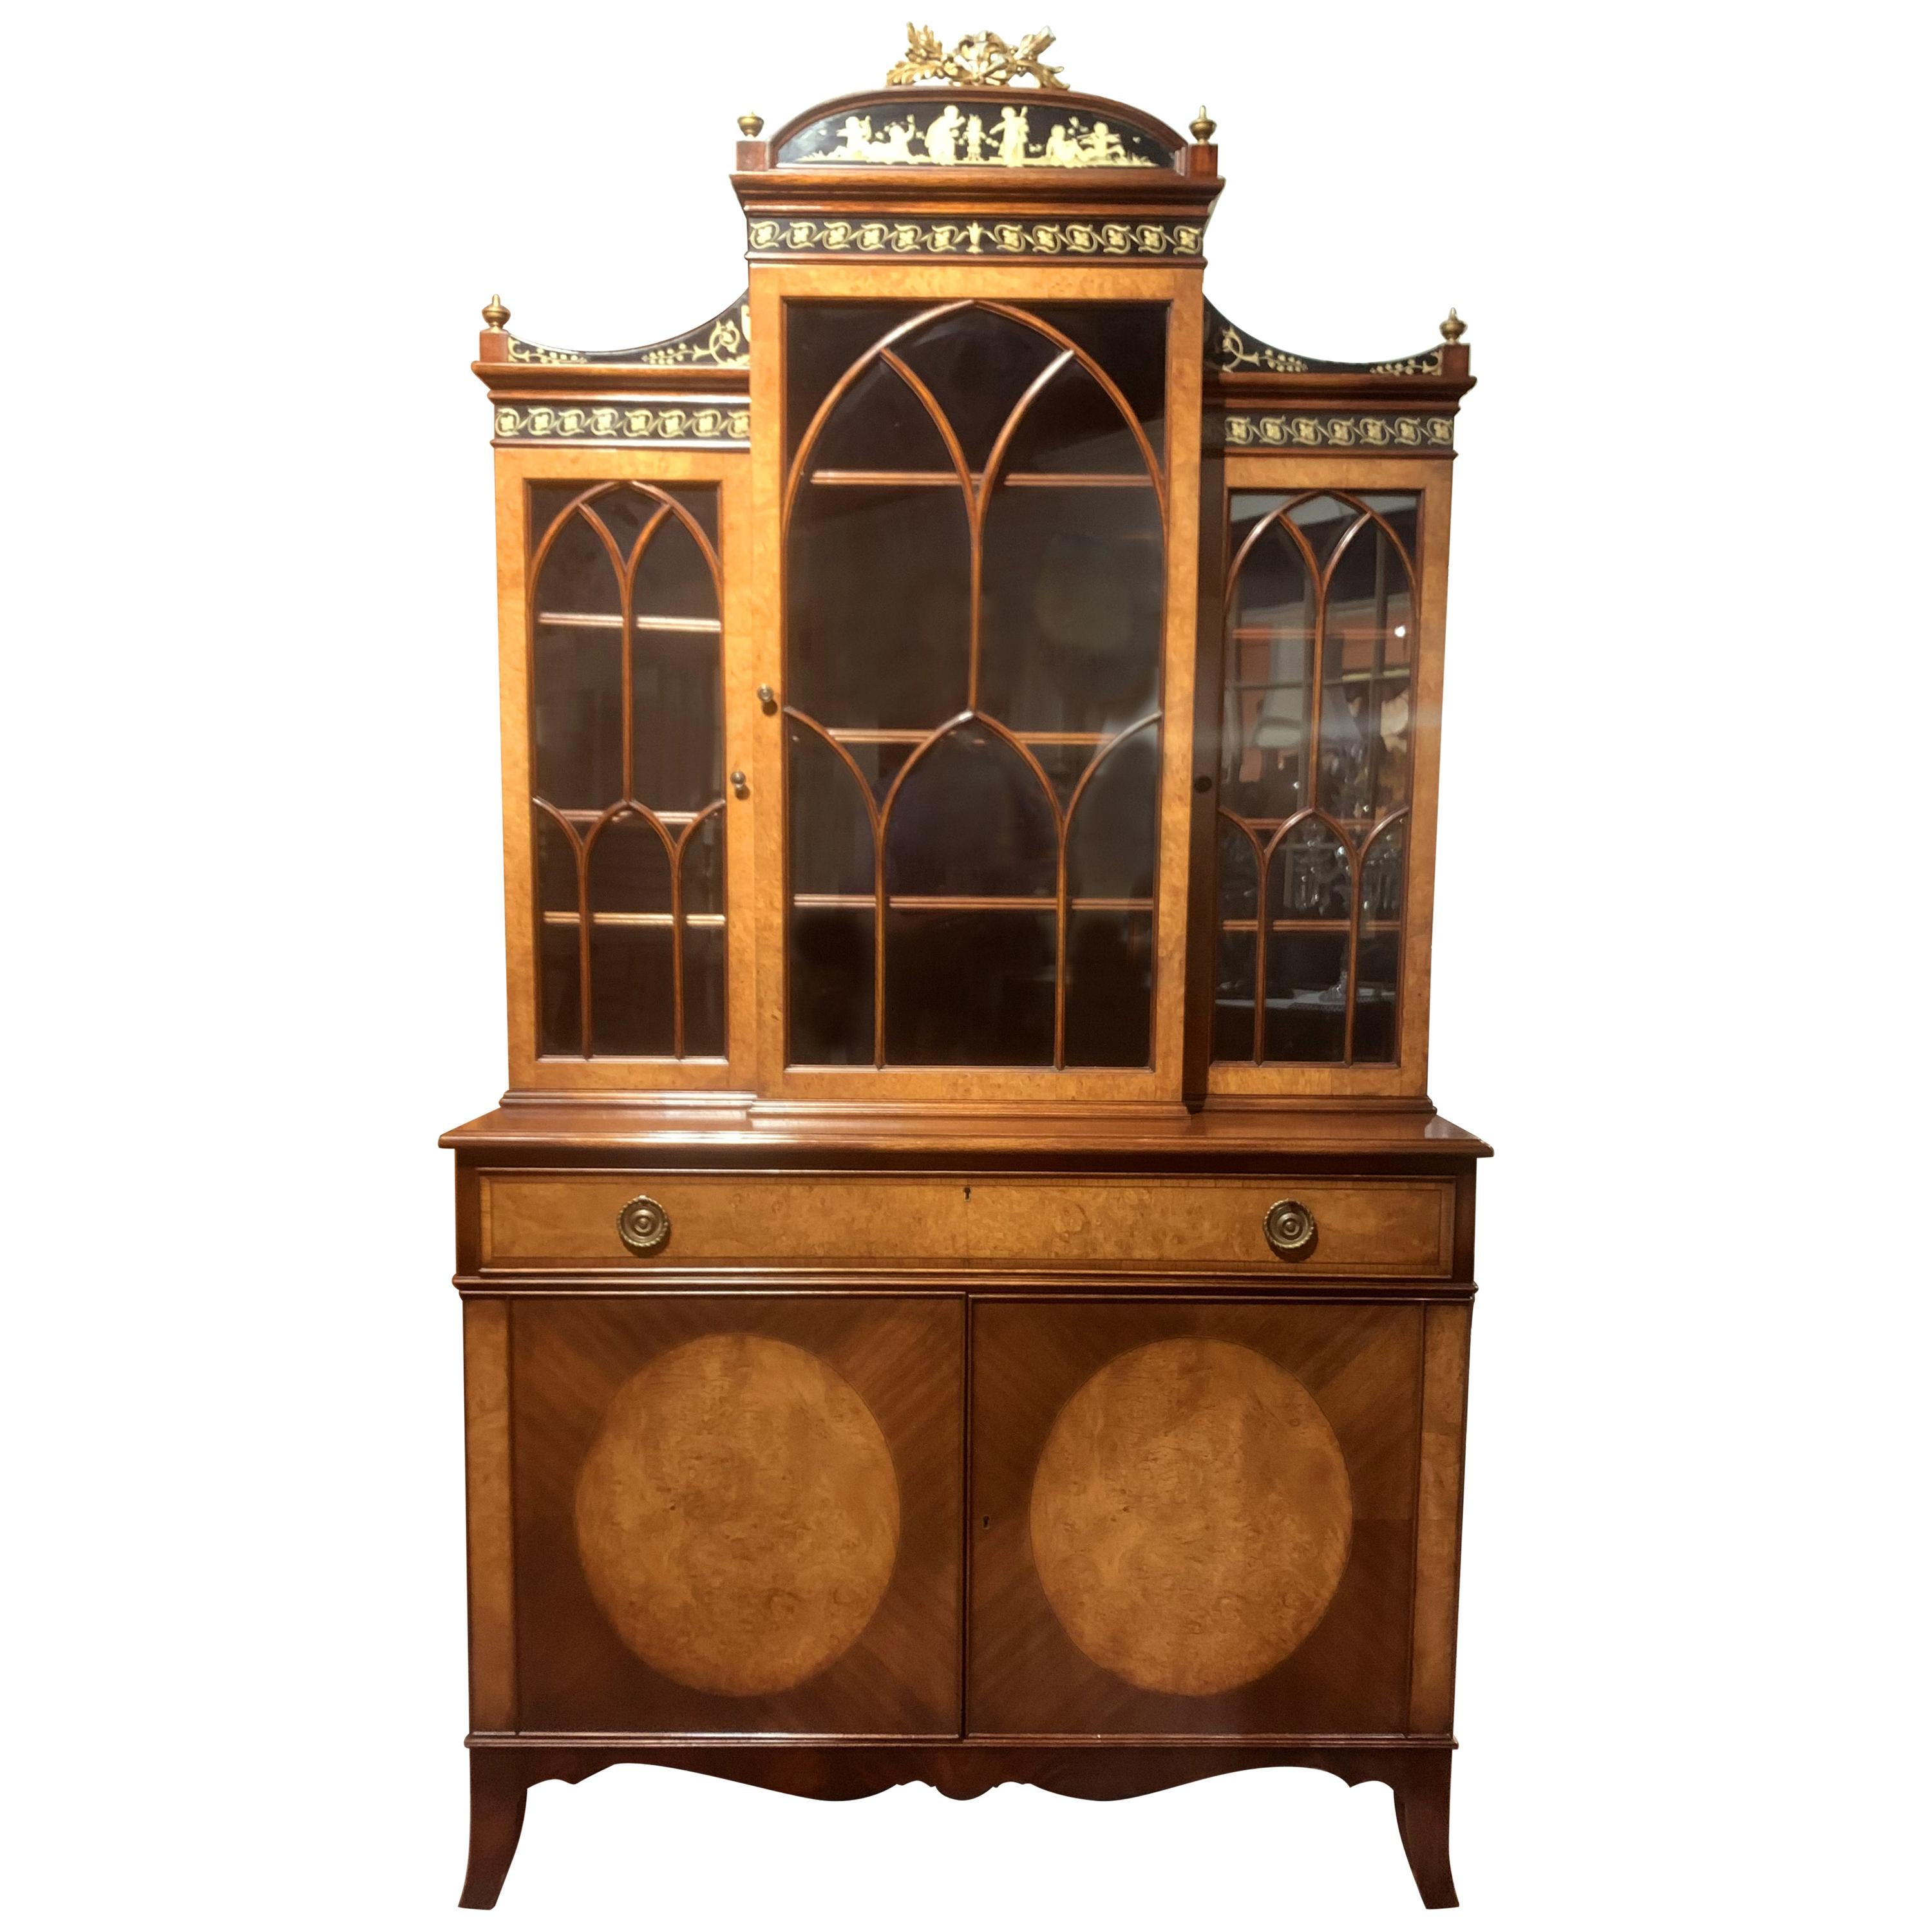 Diminutive Adam Style Breakfront Bookcase or China Cabinet by F&G Furniture Co